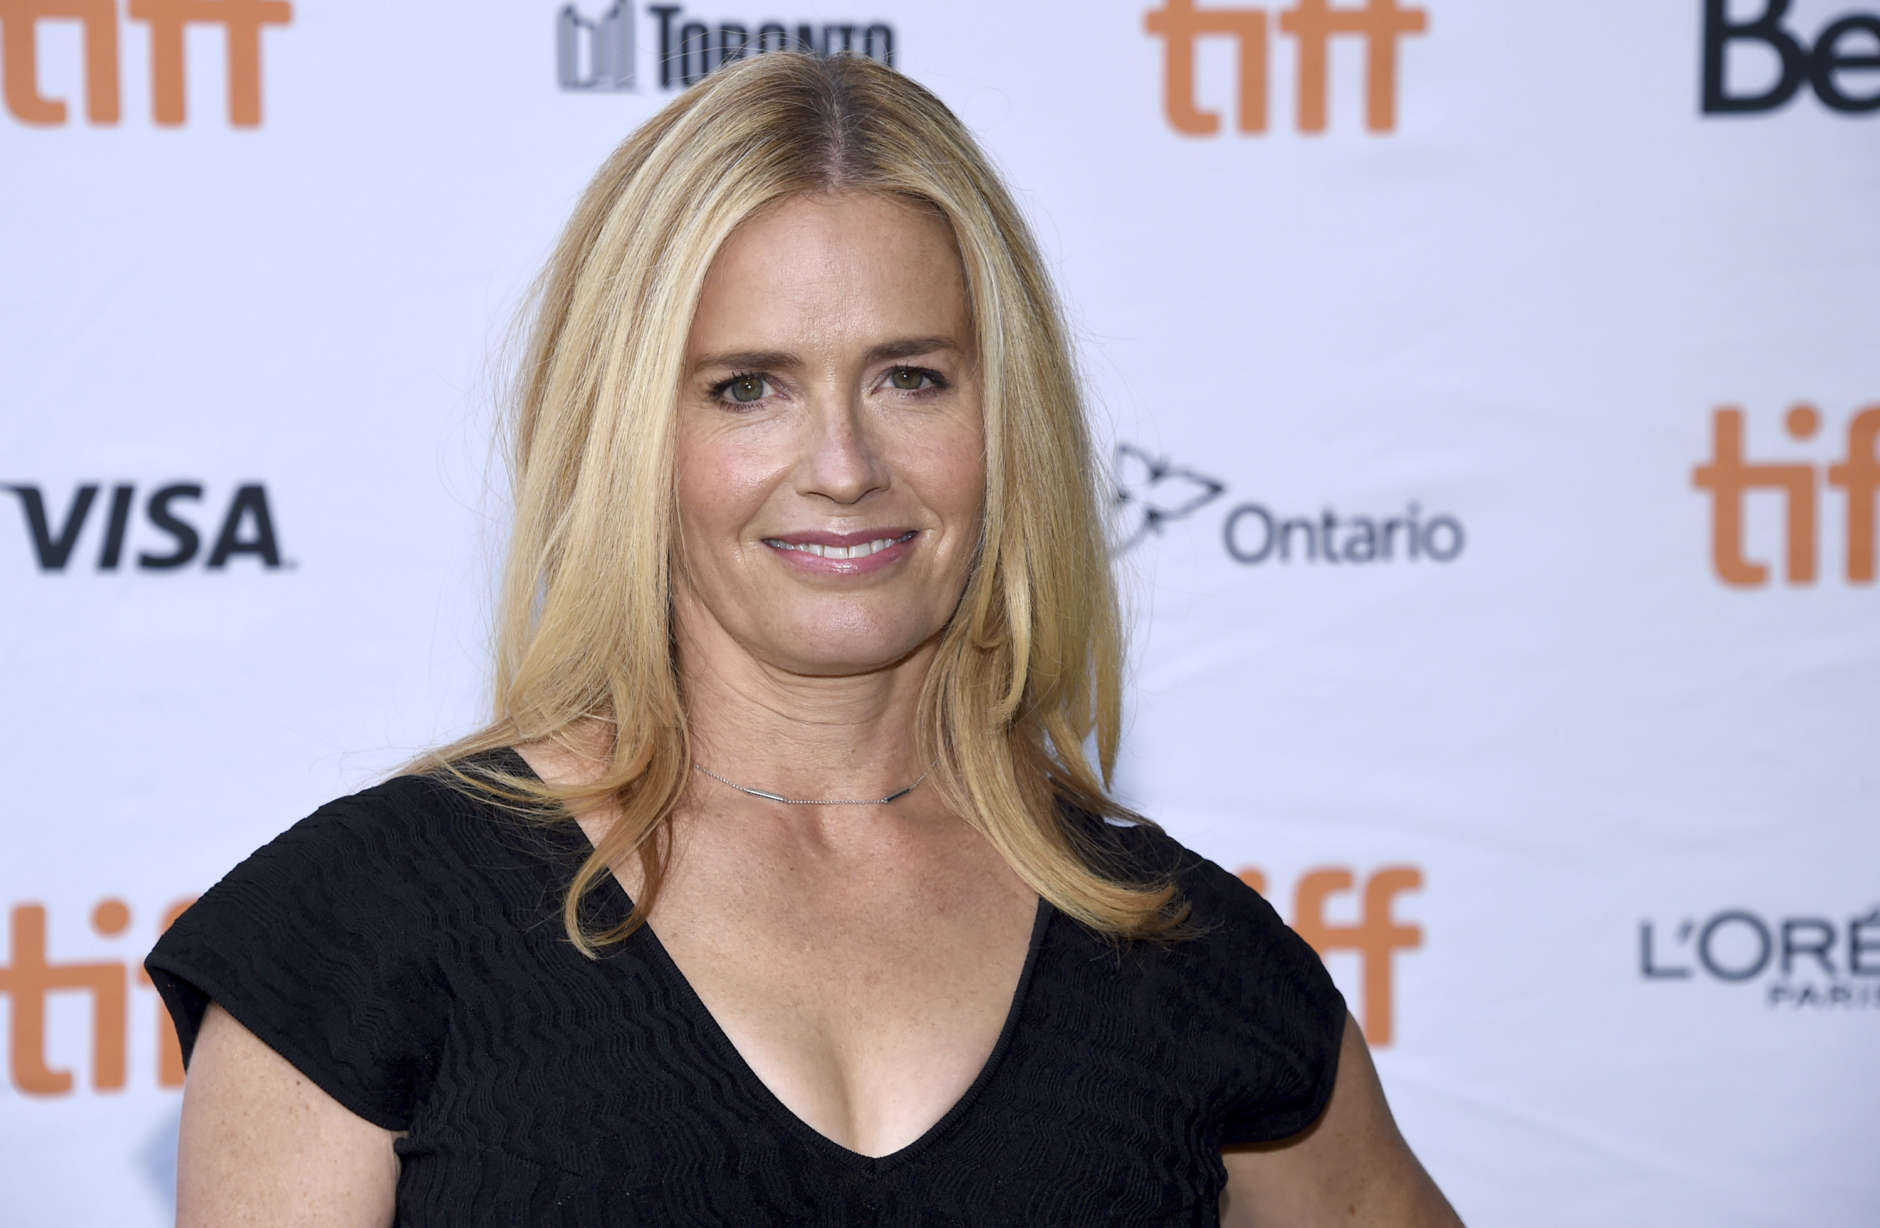 Elisabeth Shue attends a premiere for "Battle of the Sexes" on day 4 of the Toronto International Film Festival at the Ryerson Theatre on Sunday, Sept. 10, 2017, in Toronto. (Photo by Evan Agostini/Invision/AP)